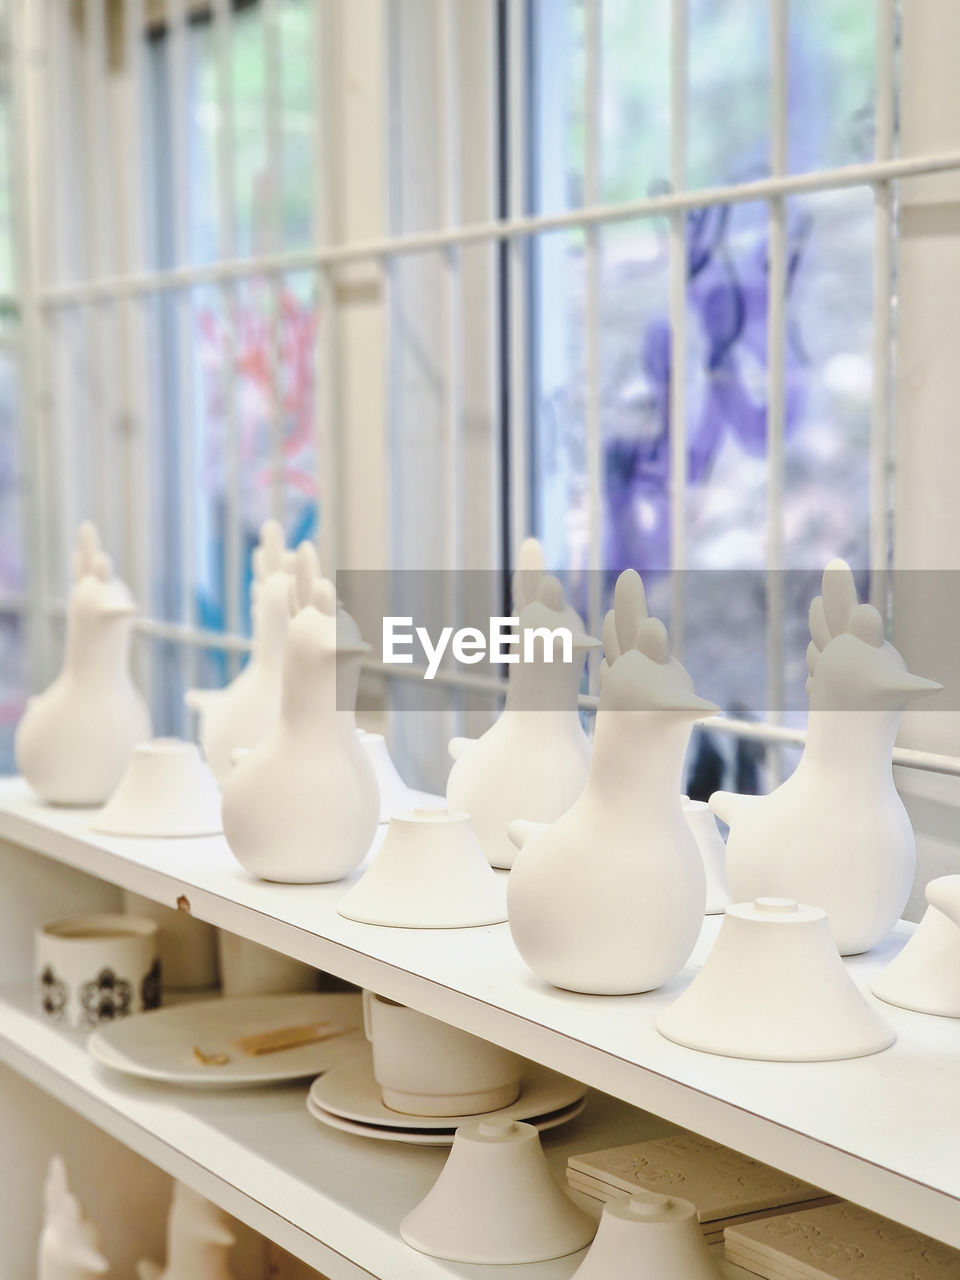 window, retail, indoors, ceramic, store, no people, business, white, pottery, shopping, fashion, porcelain, large group of objects, vase, craft, glass, day, retail display, shelf, elegance, focus on foreground